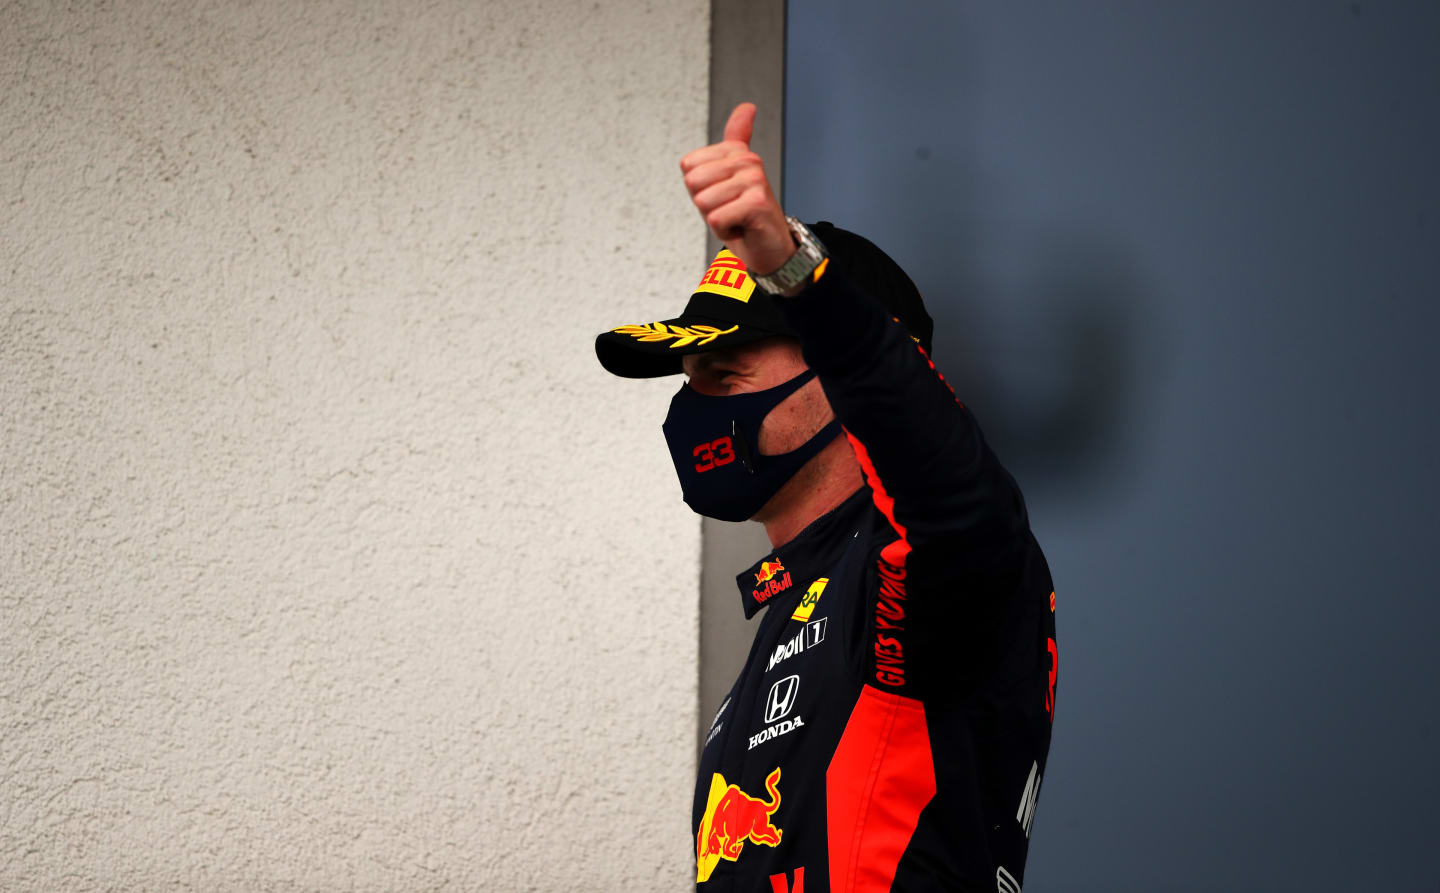 BUDAPEST, HUNGARY - JULY 19: Second placed Max Verstappen of Netherlands and Red Bull Racing walks to the podium during the Formula One Grand Prix of Hungary at Hungaroring on July 19, 2020 in Budapest, Hungary. (Photo by Bryn Lennon/Getty Images)